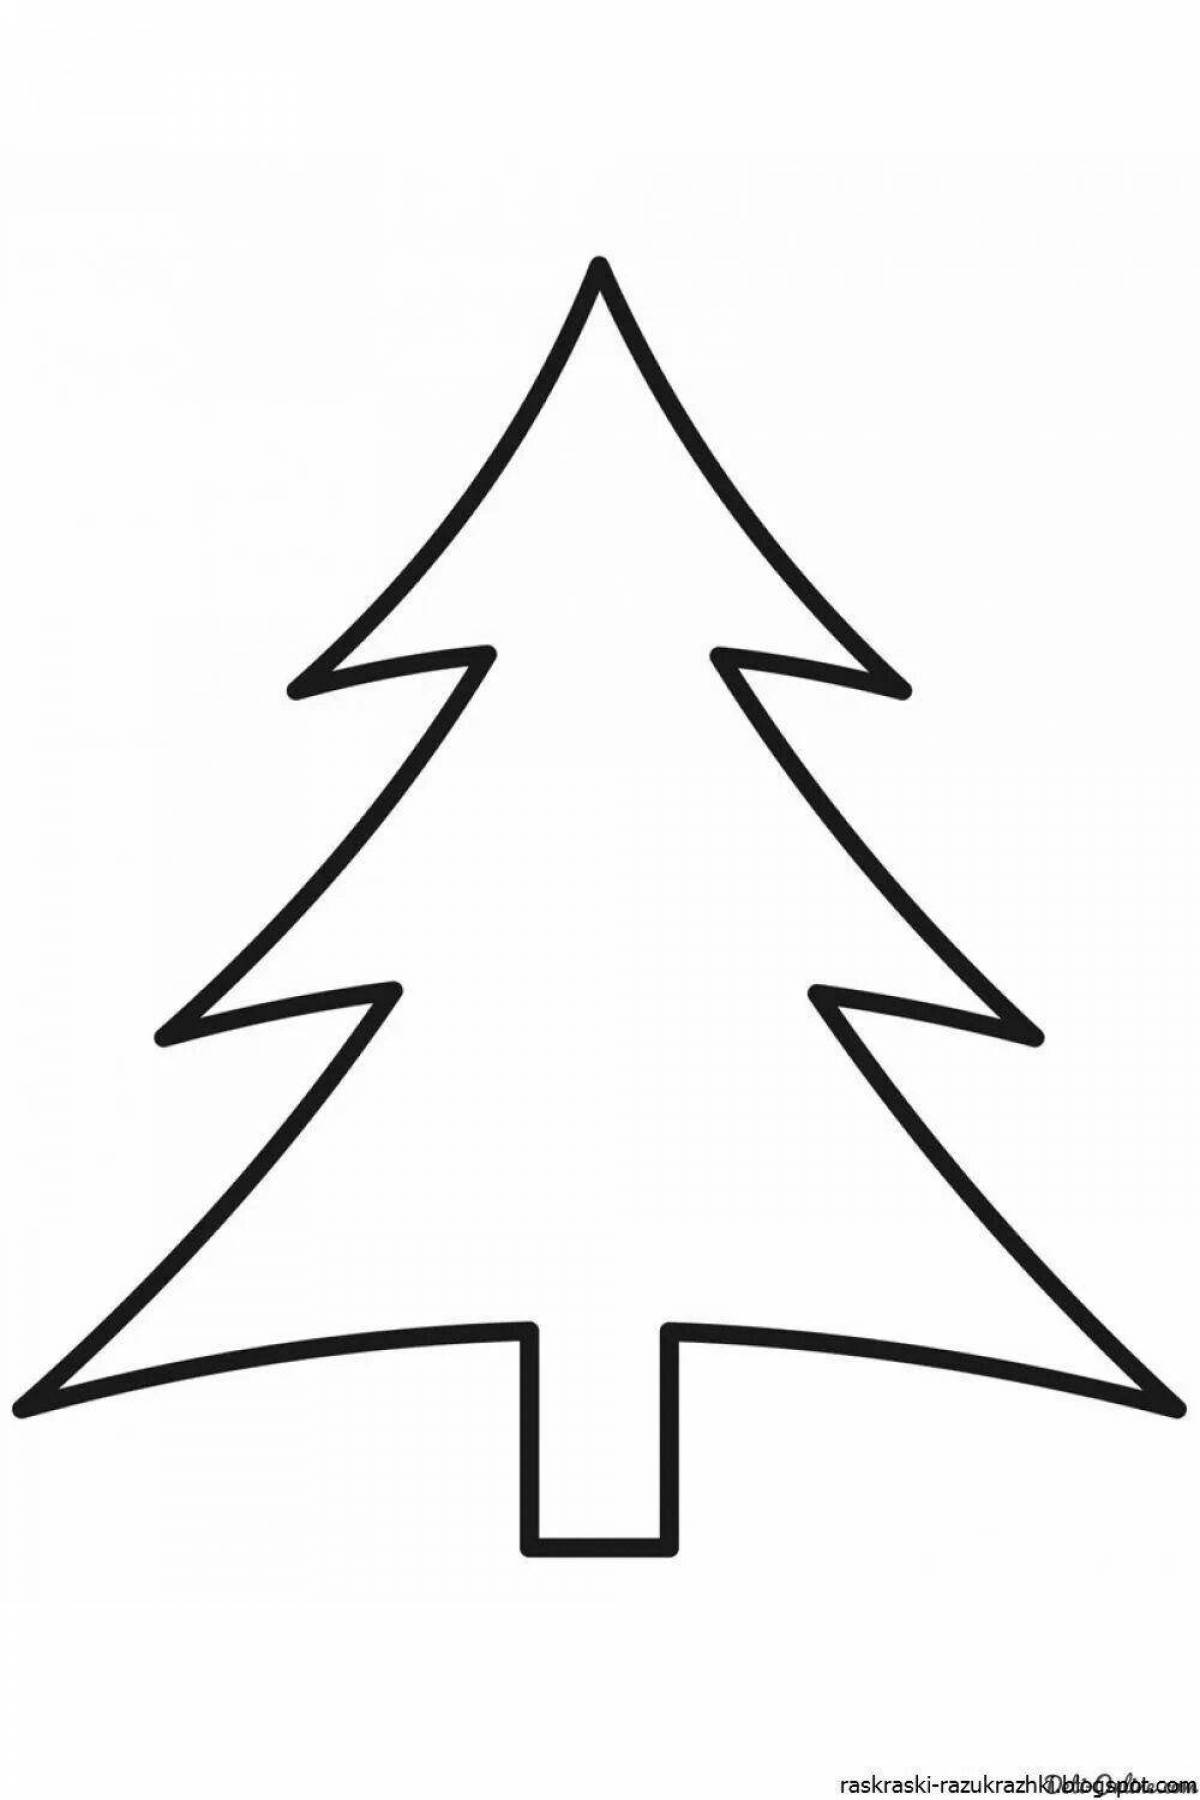 Christmas tree coloring book for kids